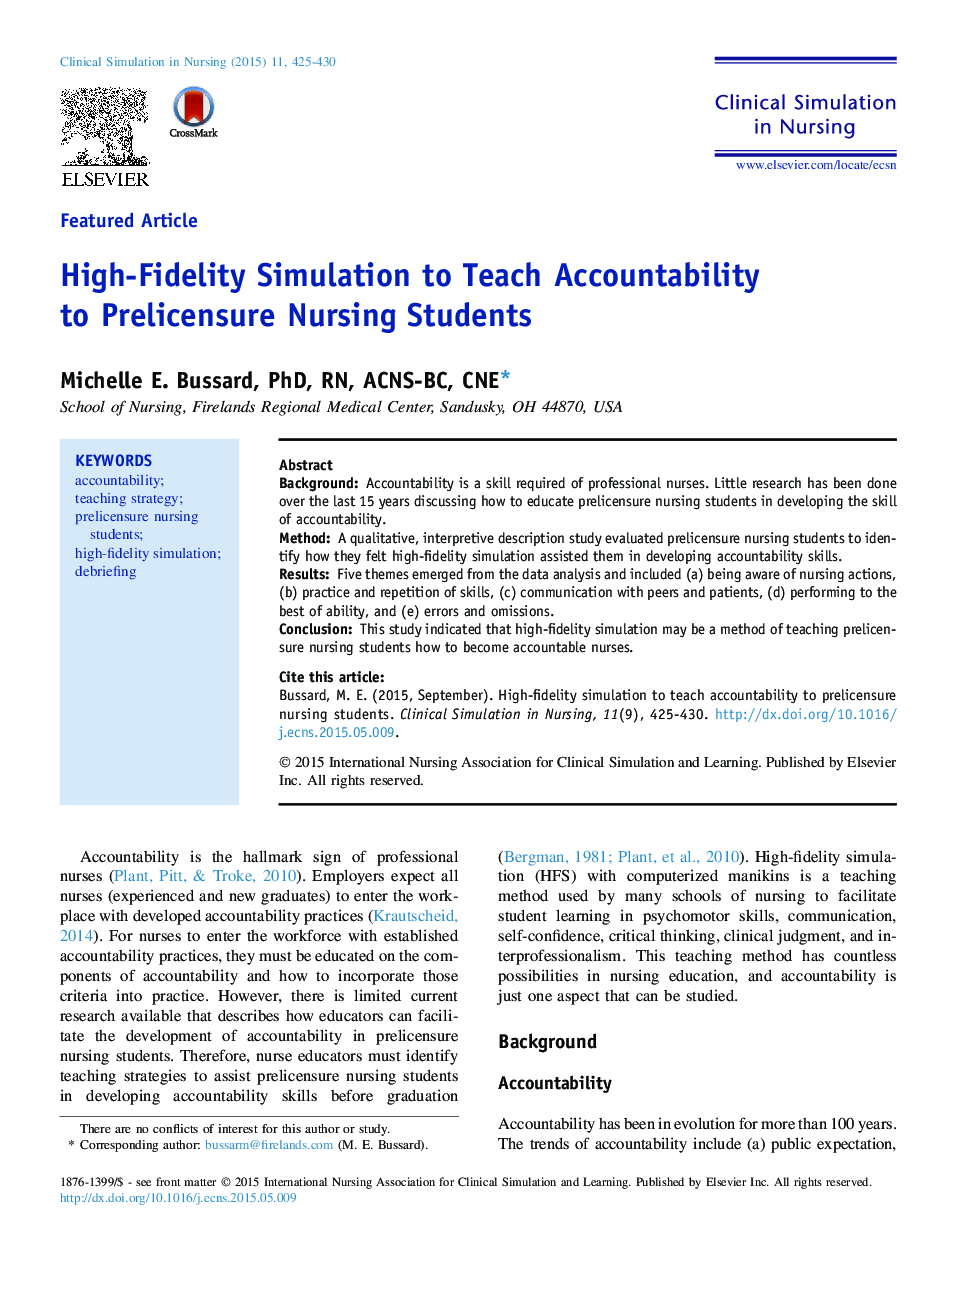 High-Fidelity Simulation to Teach Accountability to Prelicensure Nursing Students 